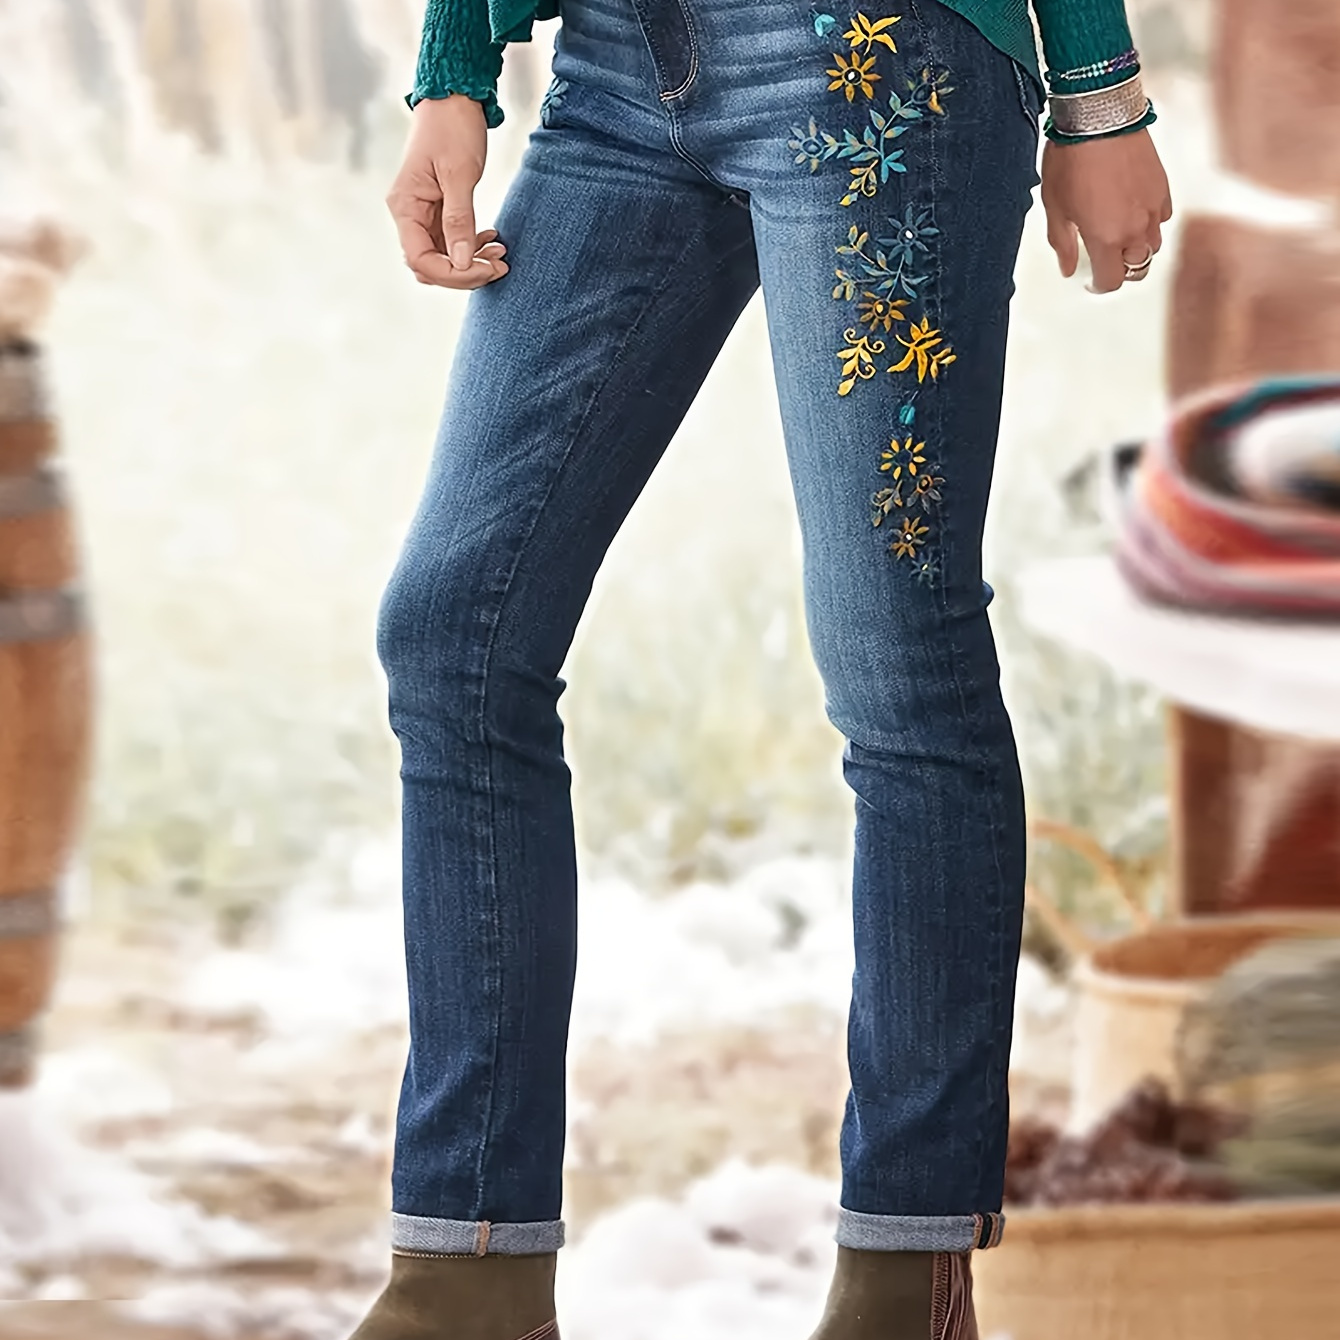 

Floral Embroidered Roll Up Hem Jeans, Plicated Pattern High-stretch Washed Denim Pants, Women's Denim Jeans & Clothing